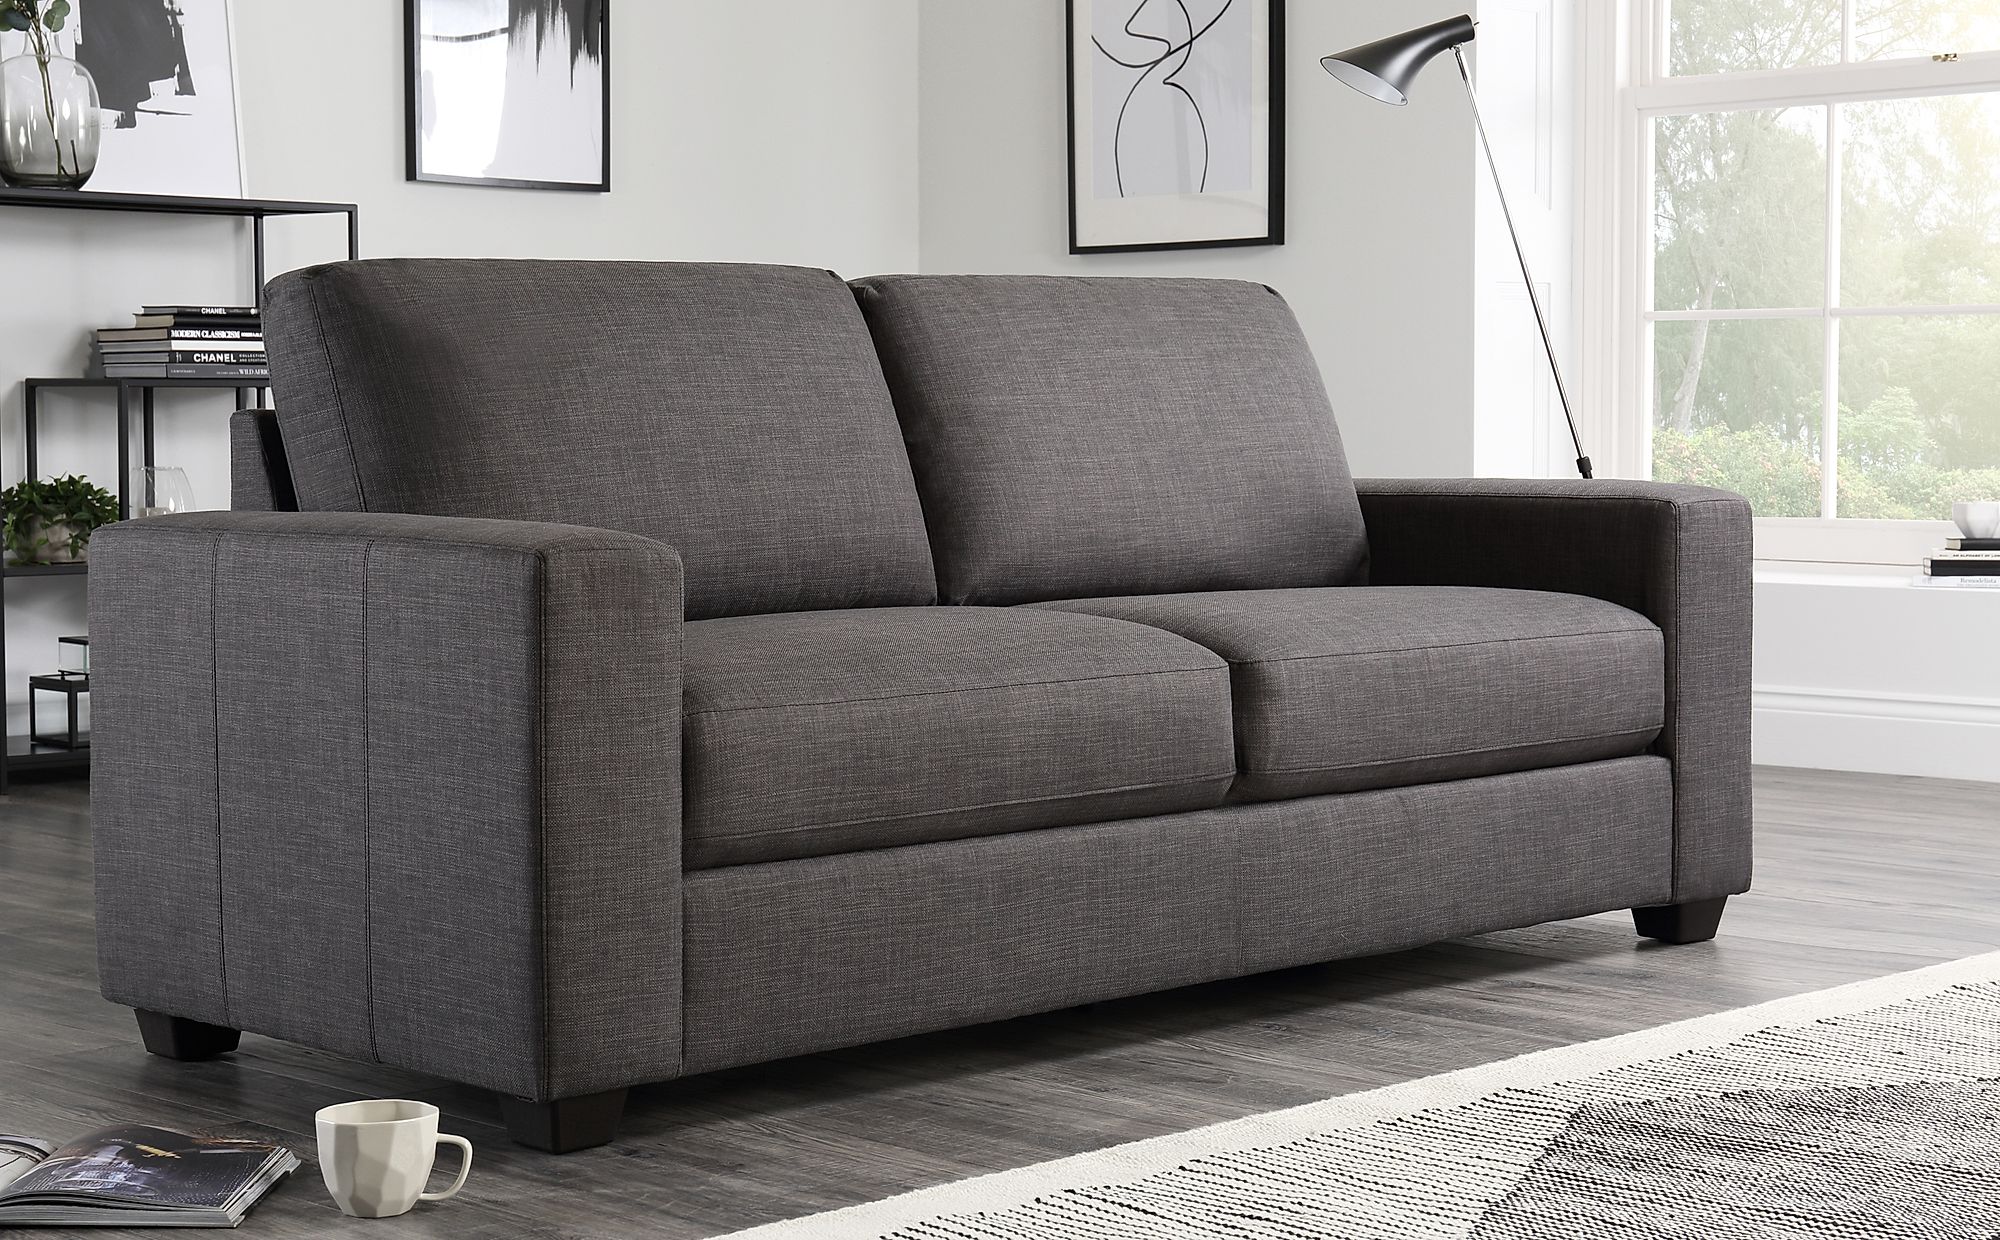 3 Seater Sofa For Living Room